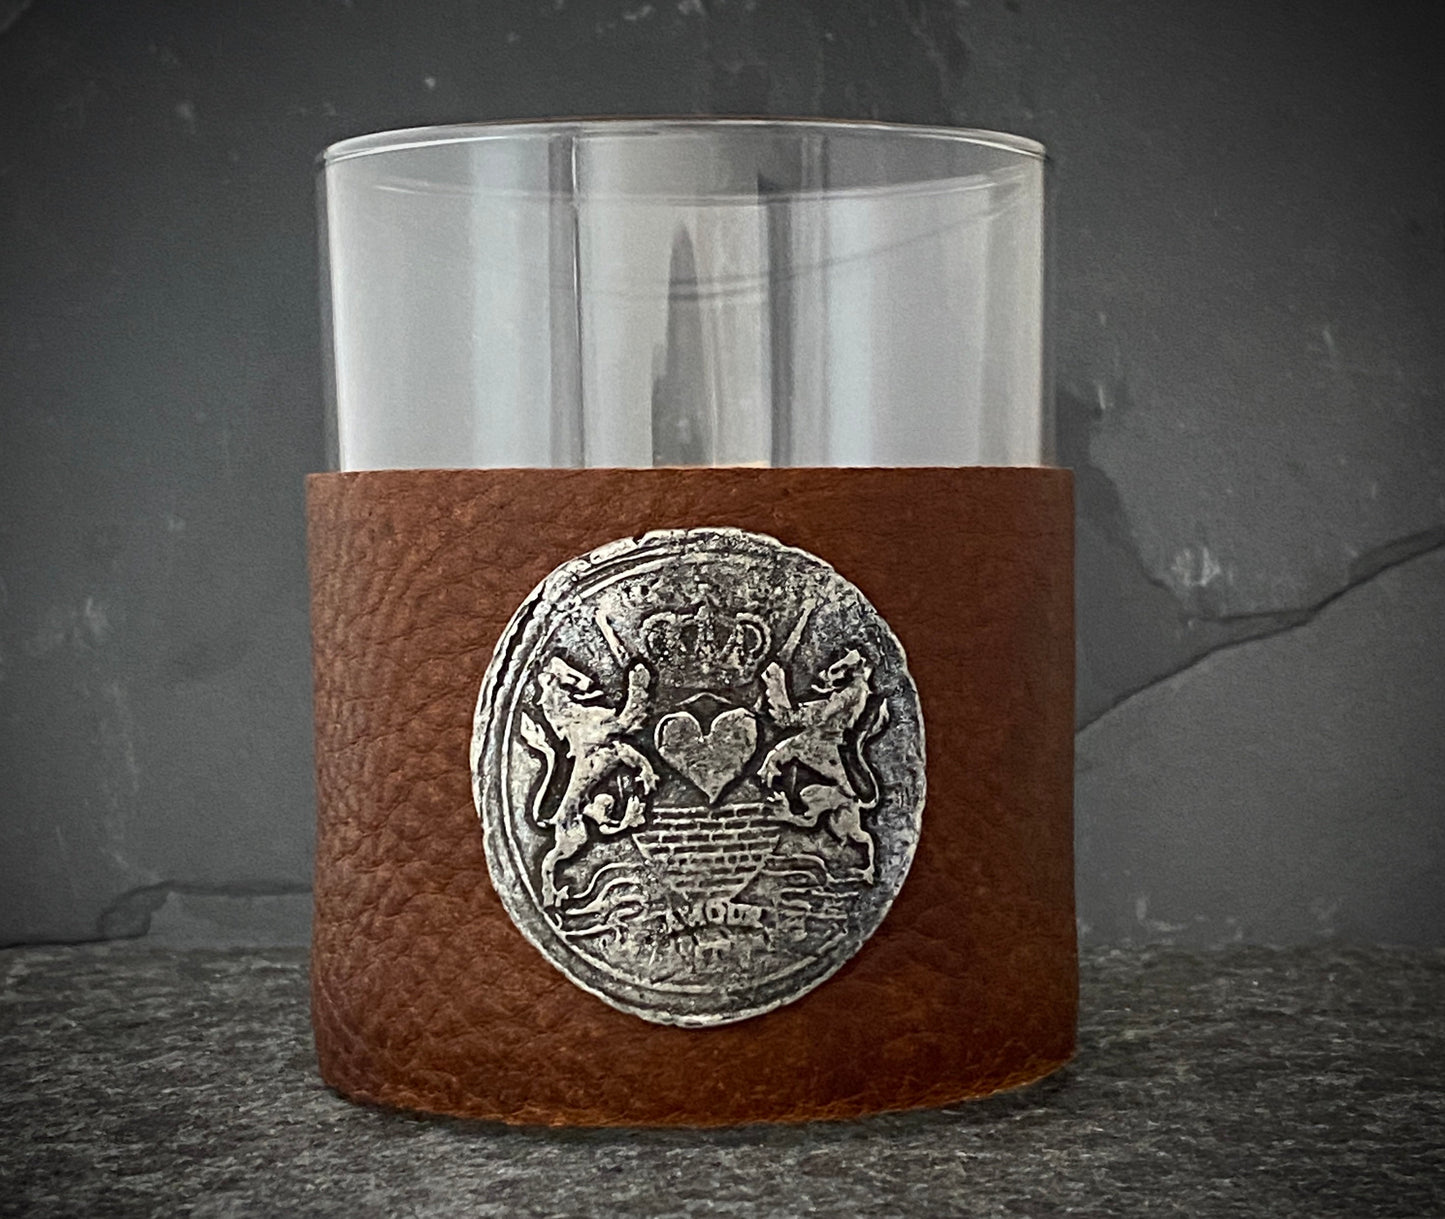 Custom Scotch Whiskey Glass, Highball, Coffee Color Leather Wrap, Antique style Wax Seal, Scotch Glasses, Genuine Leather, Love. Amour, French, BW-002